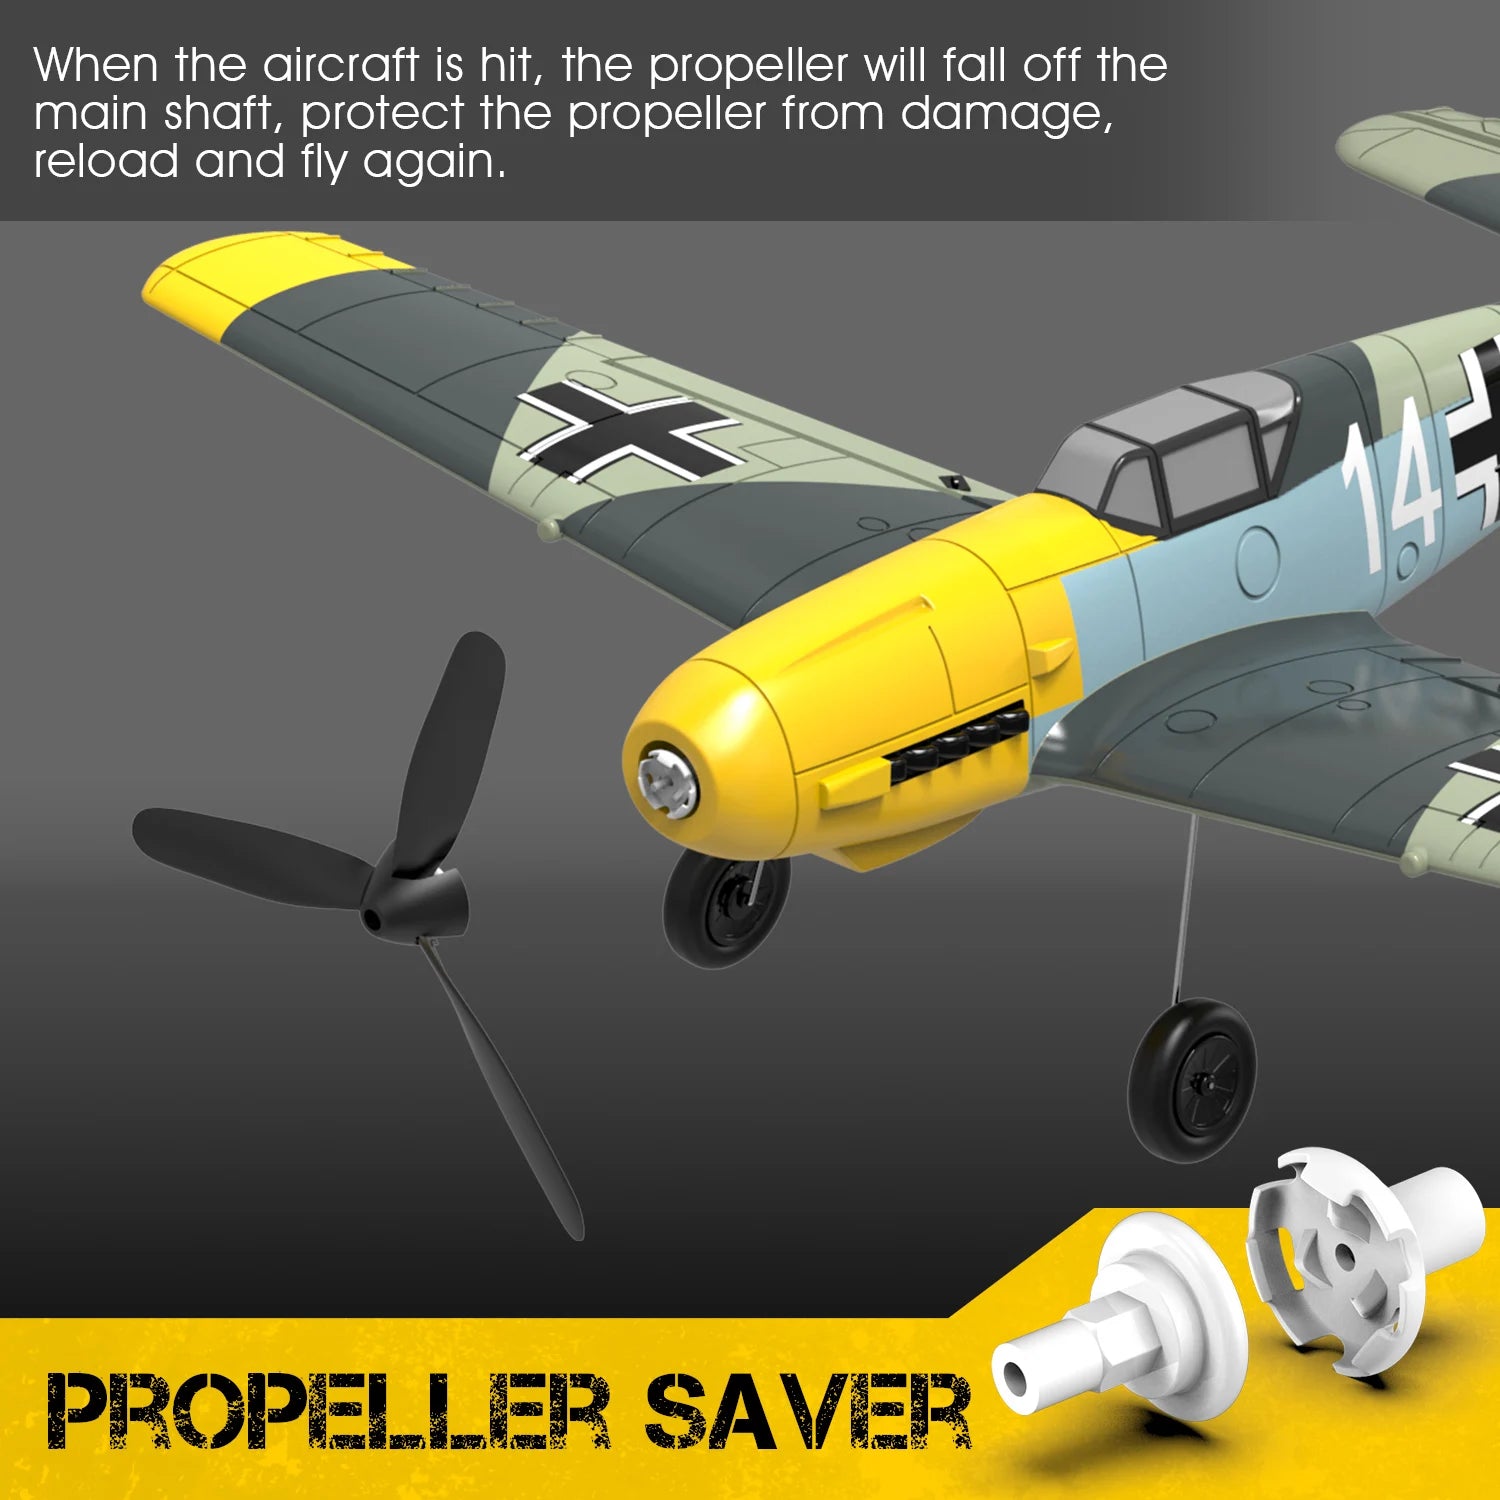 Volantex RC BF109 Airplane, when the aircraft is hit, the propeller will fall off the main shaft, protect the propel